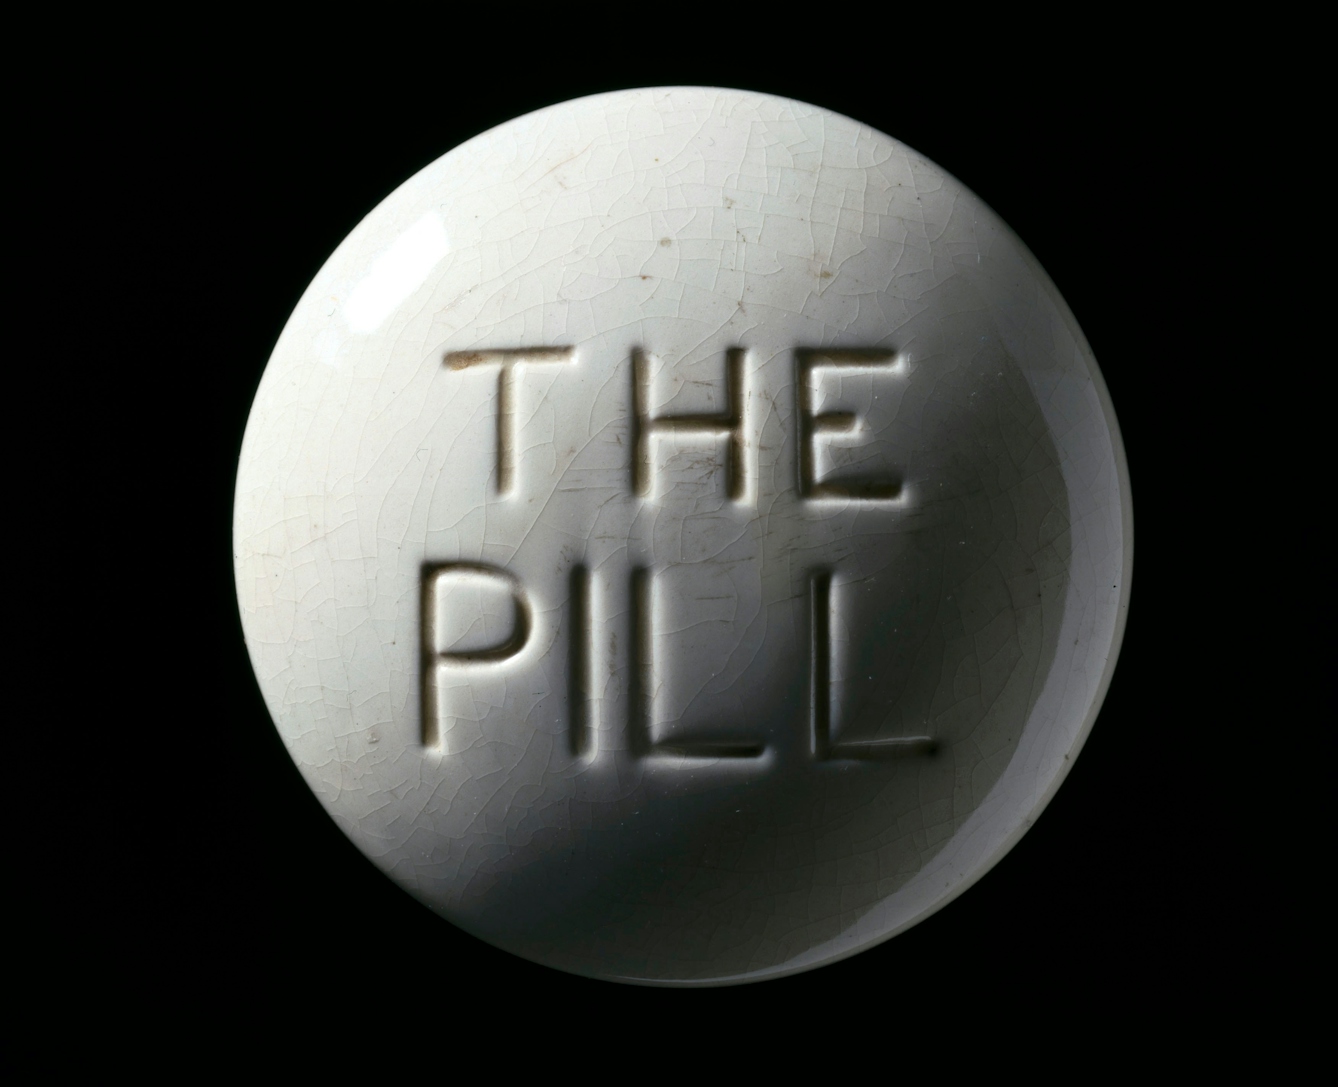 Photograph of a contraceptive pill model, Europe, c. 1970. White crackled glaze, with debossed "THE PILL" text in centre, on a black background.